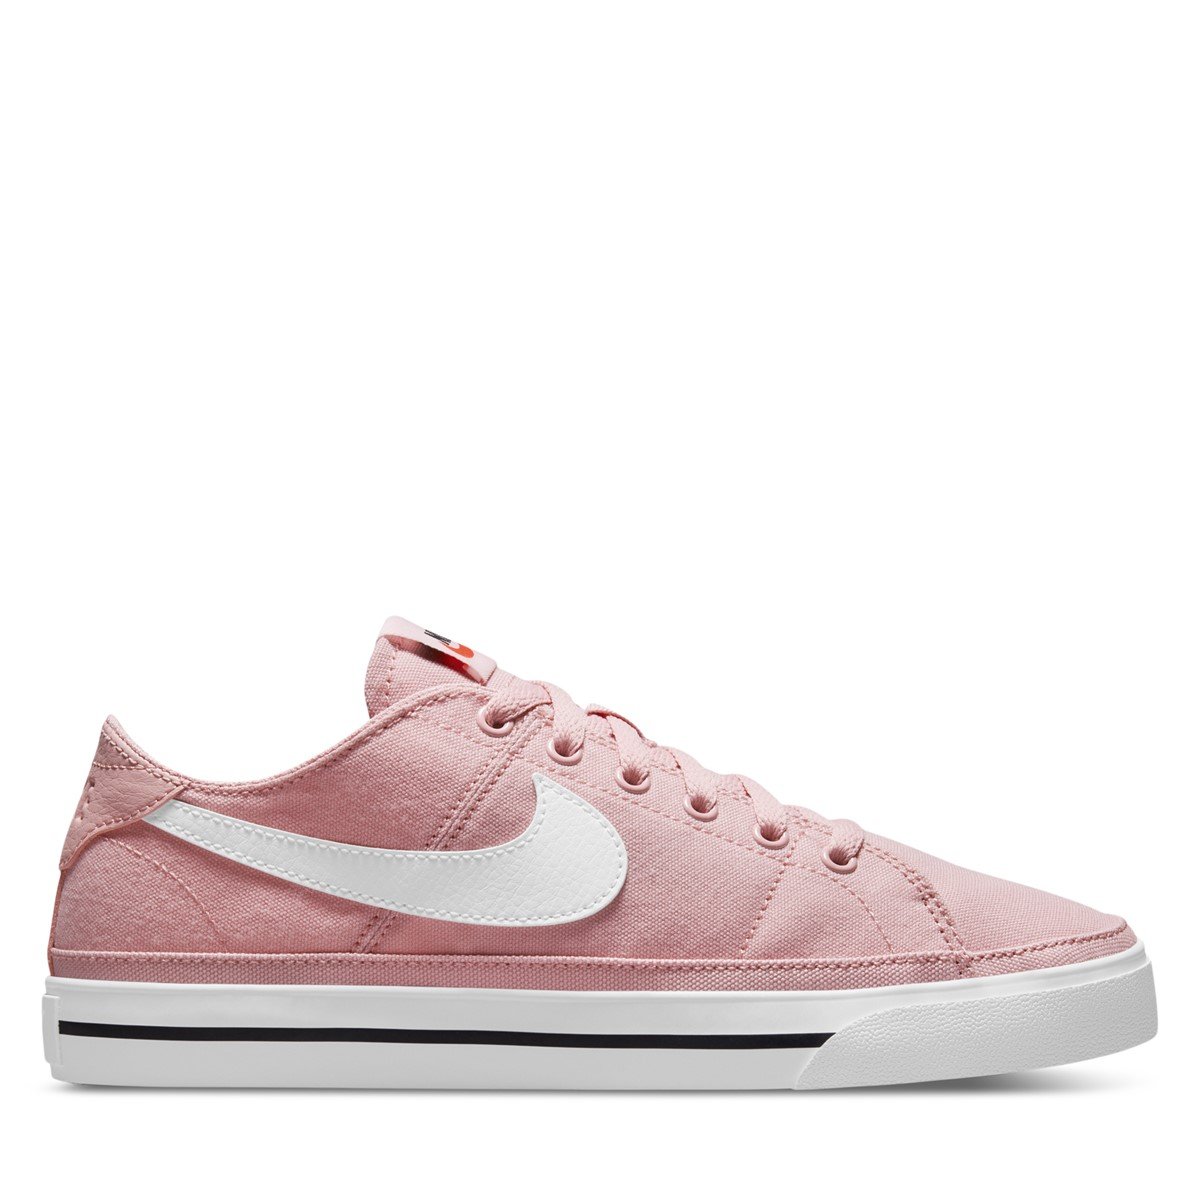 Women's Court Legacy Sneakers in Pink/White